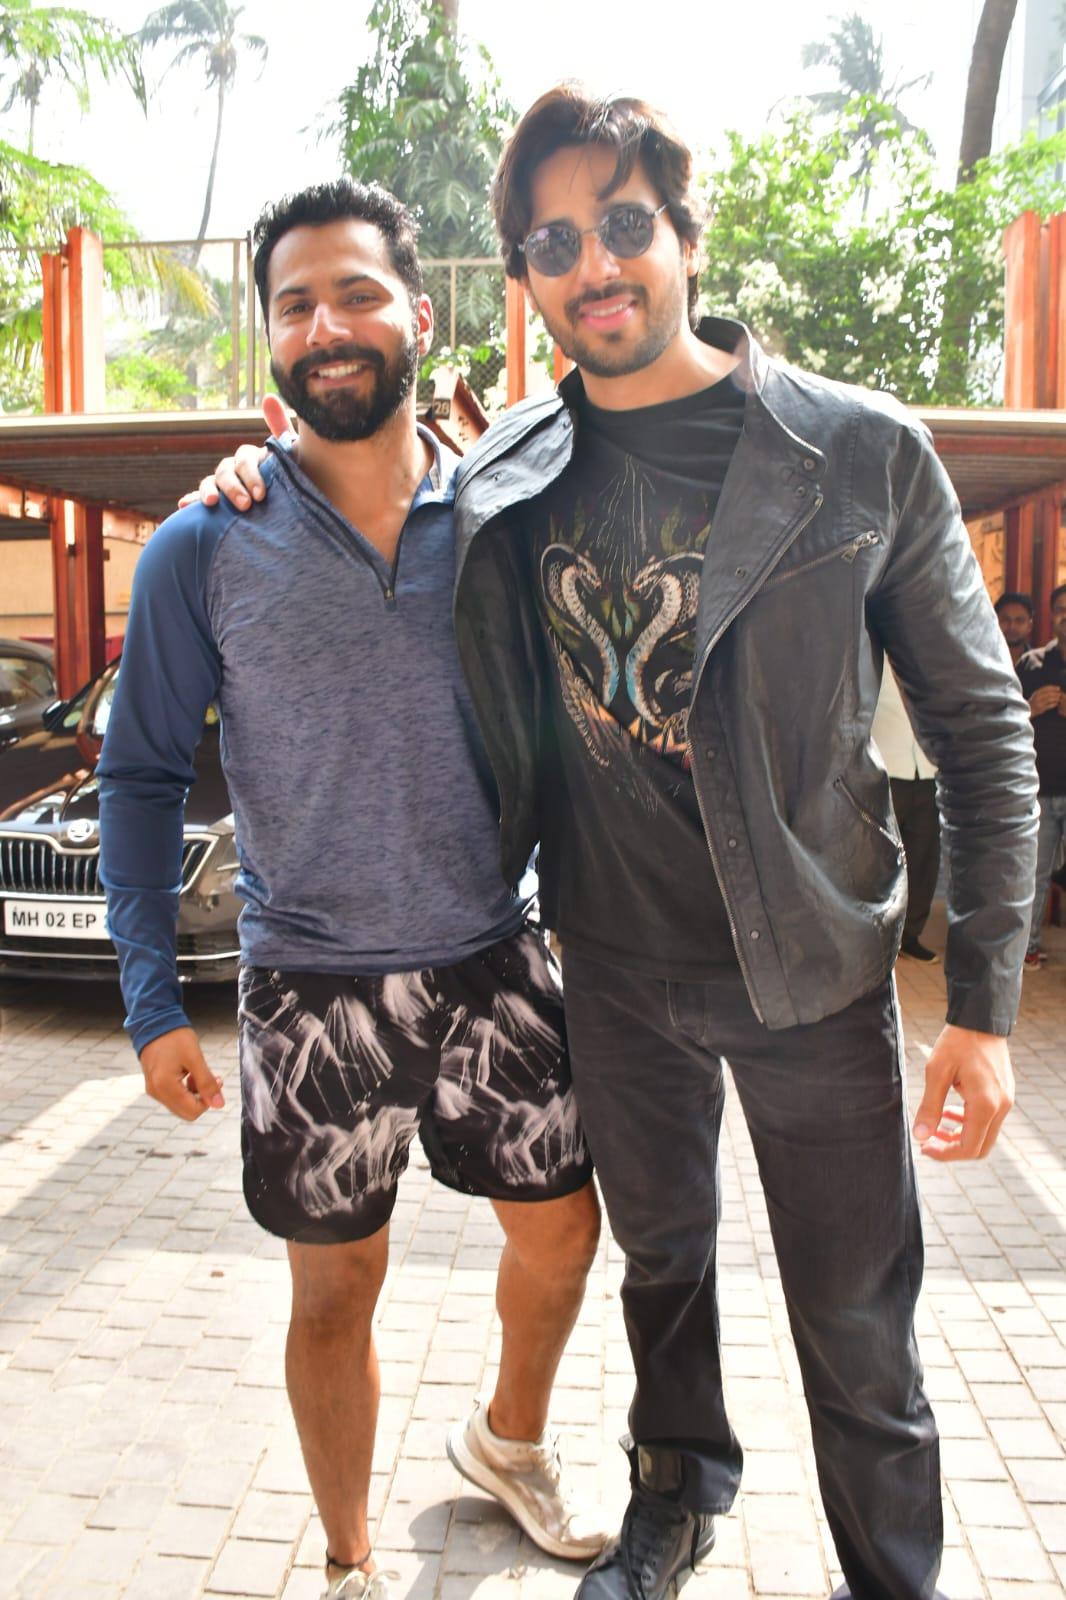 Varun Dhawan and Siddharth Malhotra had a surprising reunion as they bumped into each other